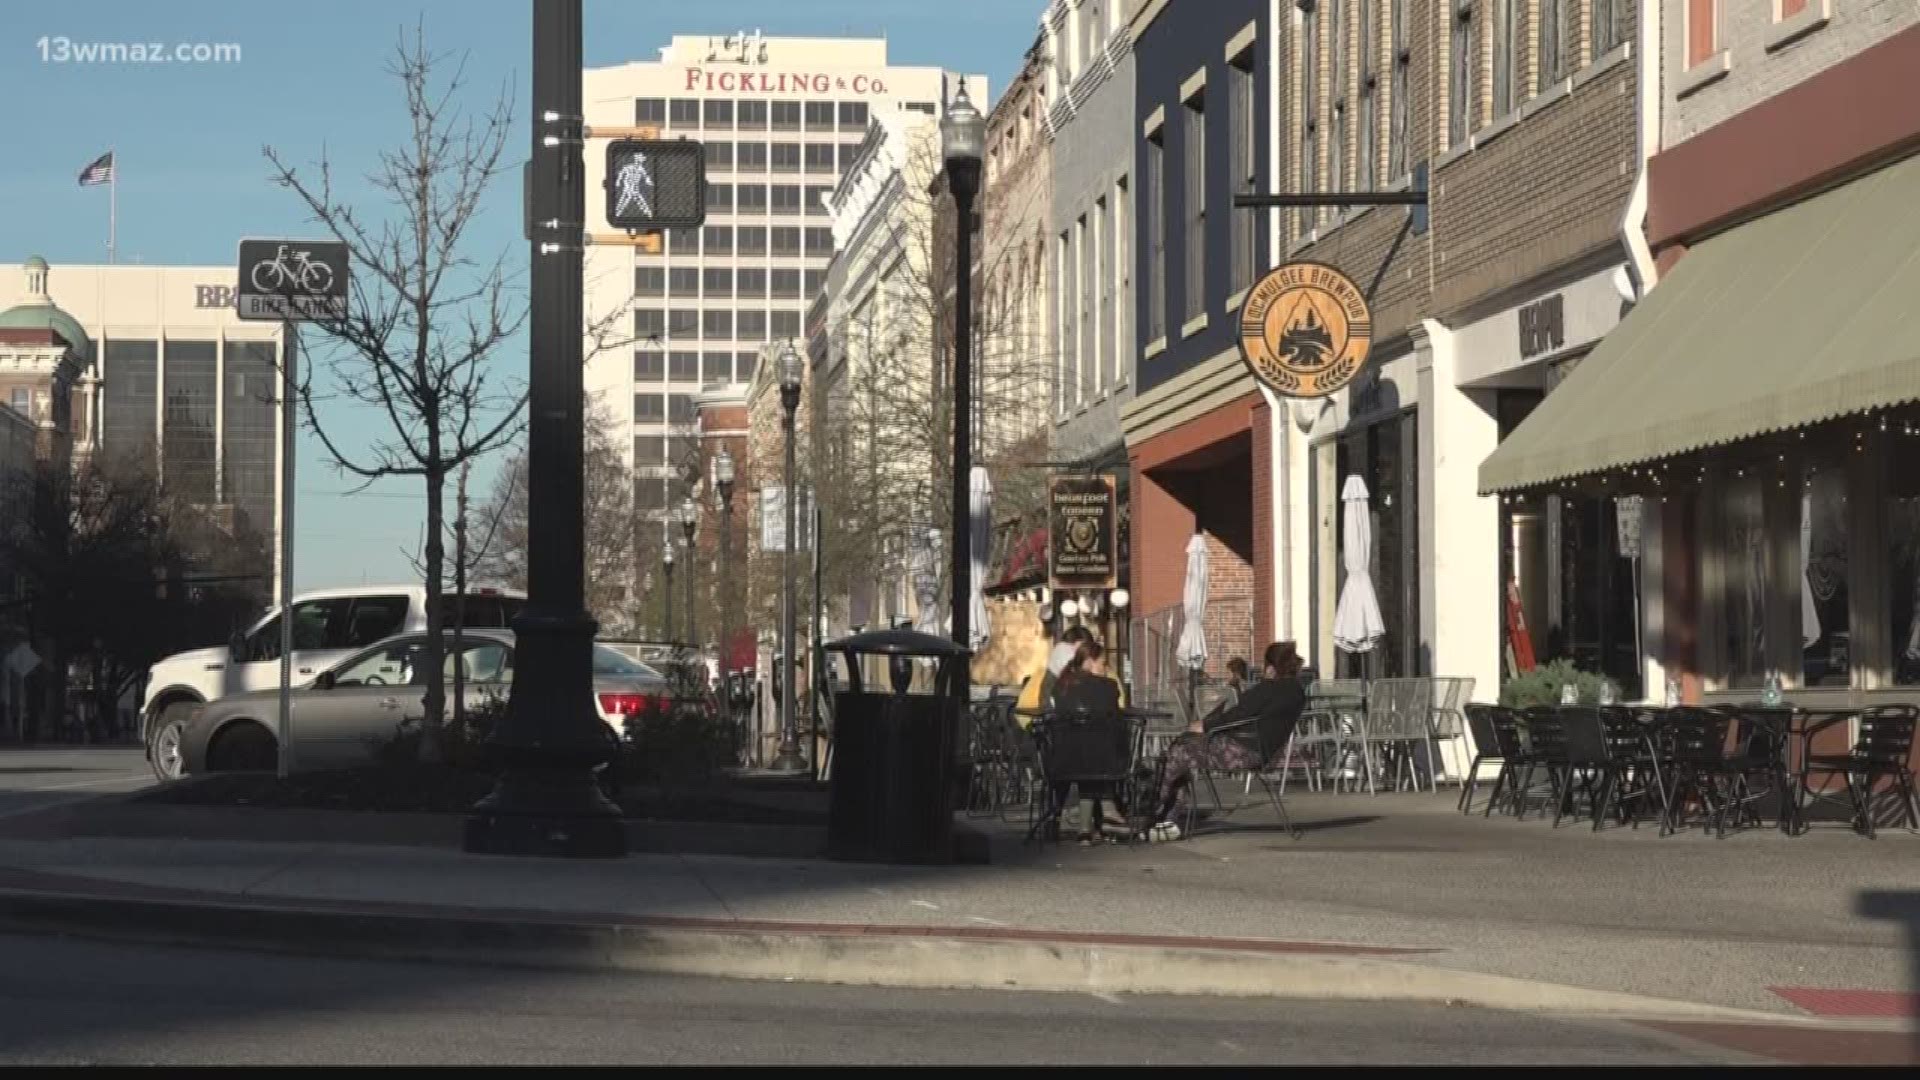 More construction will be happening on Second Street between Poplar and Plum Streets in downtown Macon.